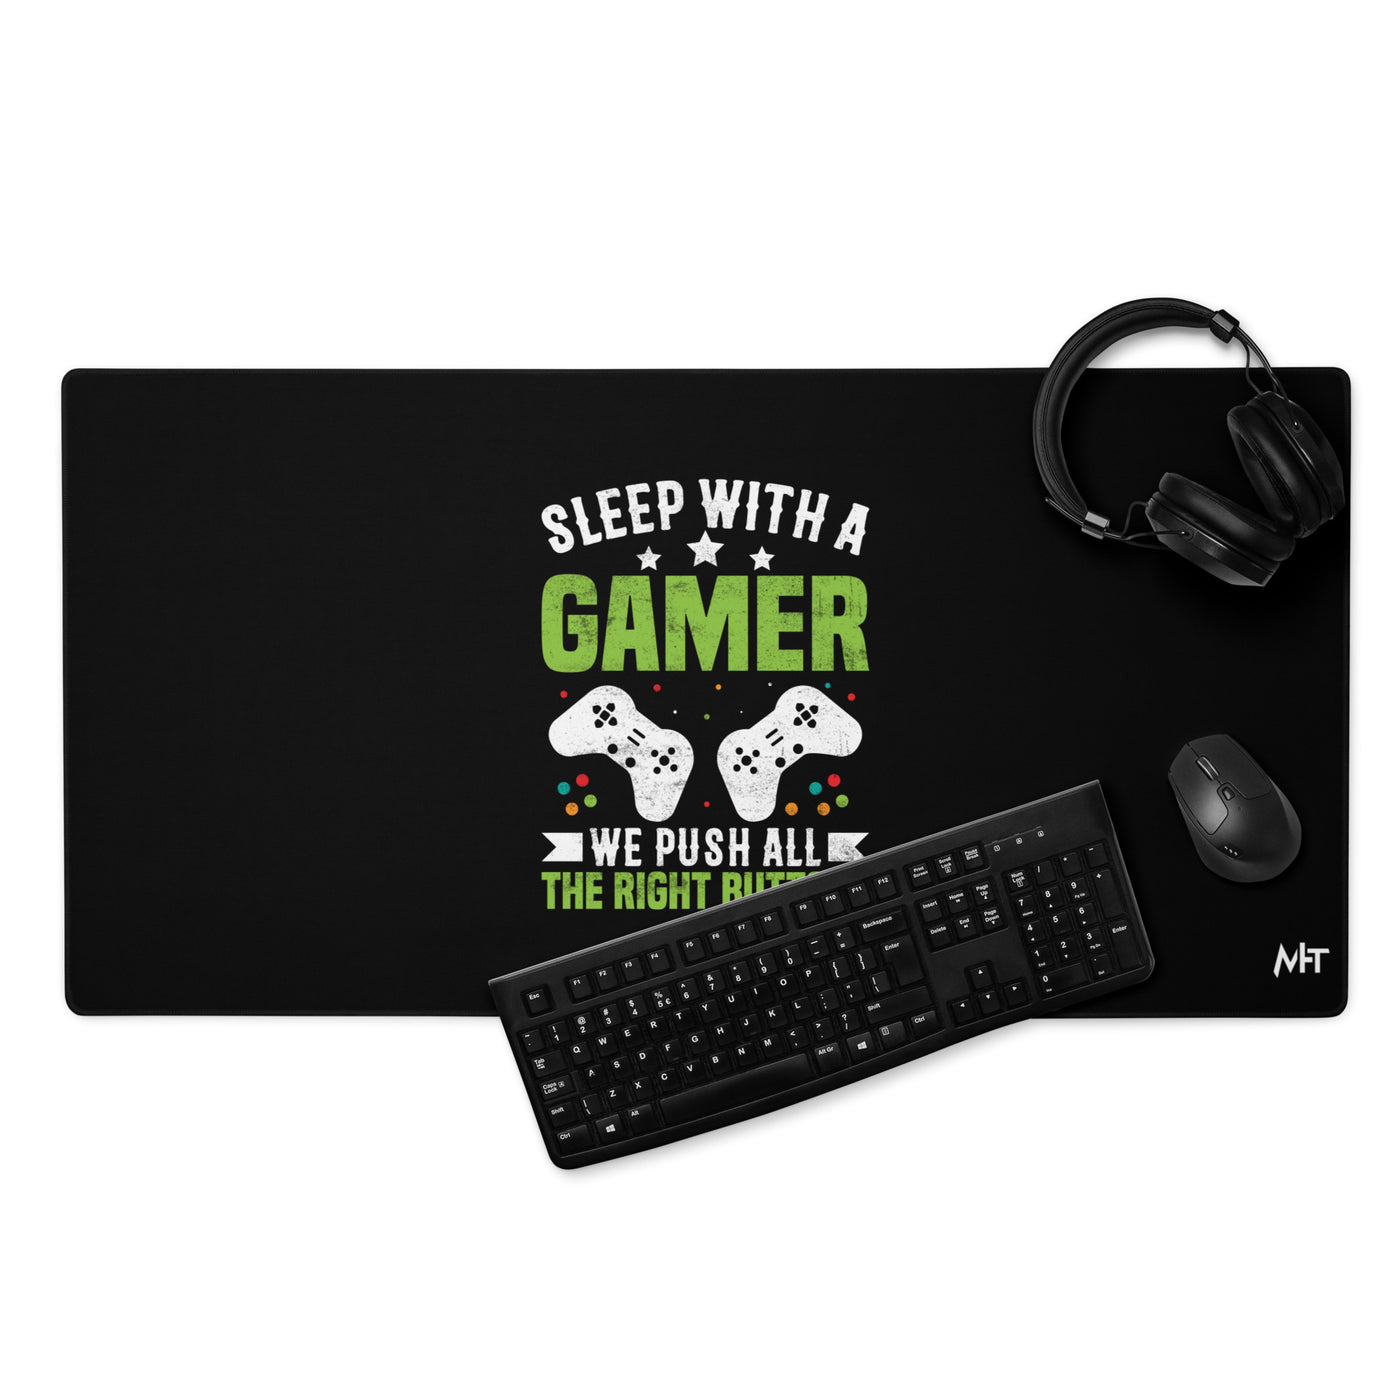 Sleep With a Gamer, We Push all the Right Button Desk Mat